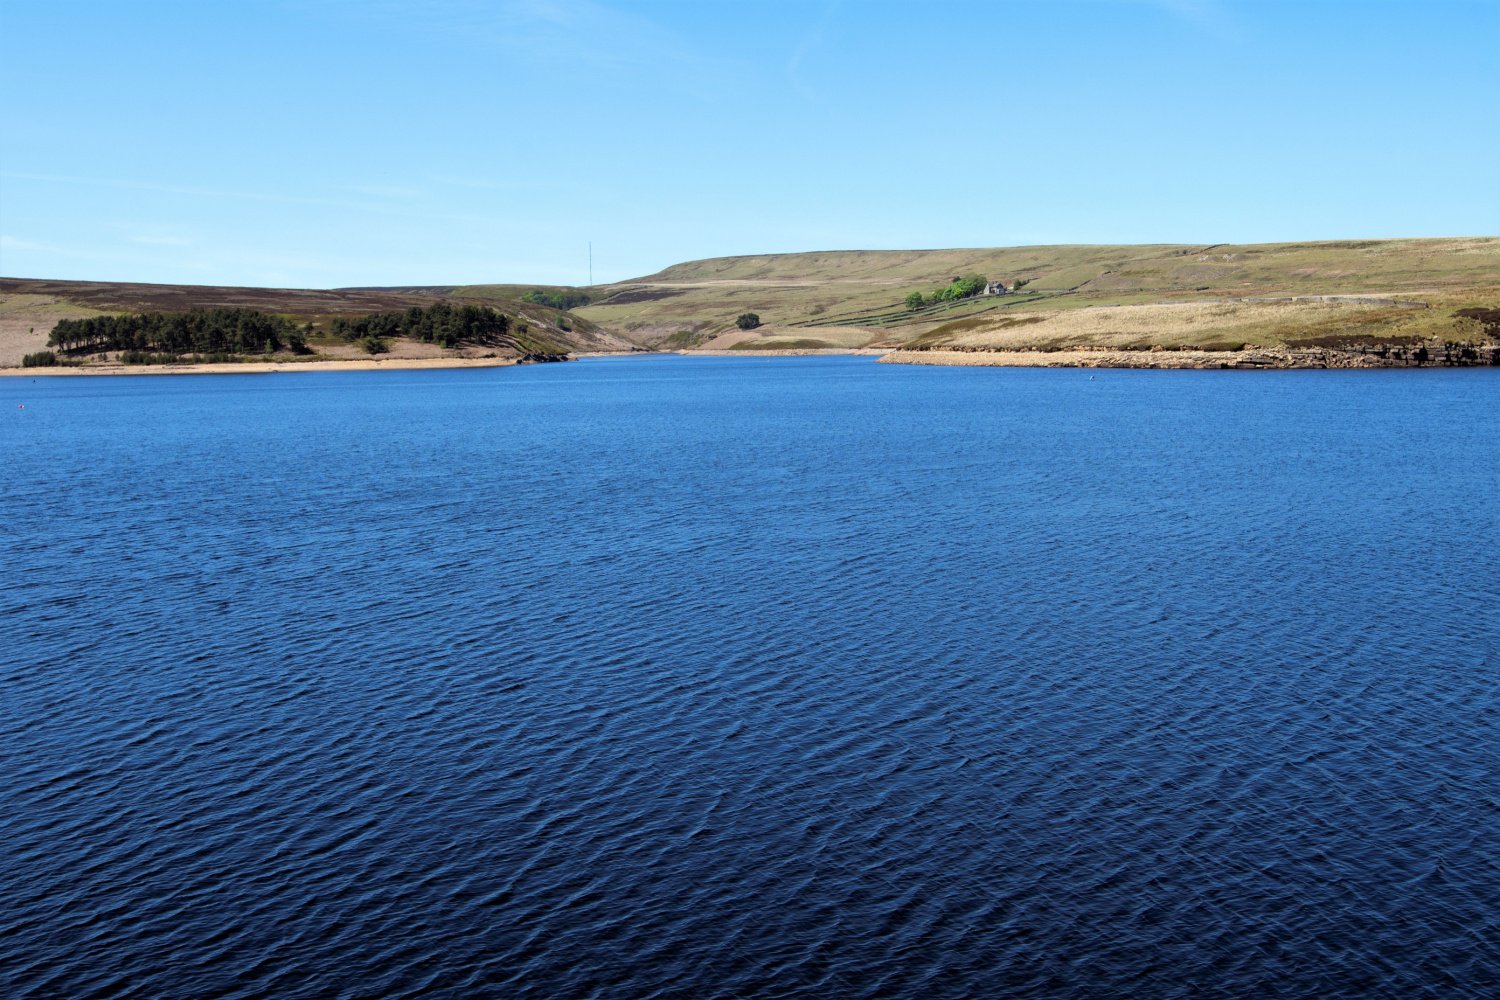 Image name winscar reservoir sheffield south yorkshire the 32 image from the post Walk: Winscar Reservoir in Yorkshire.com.